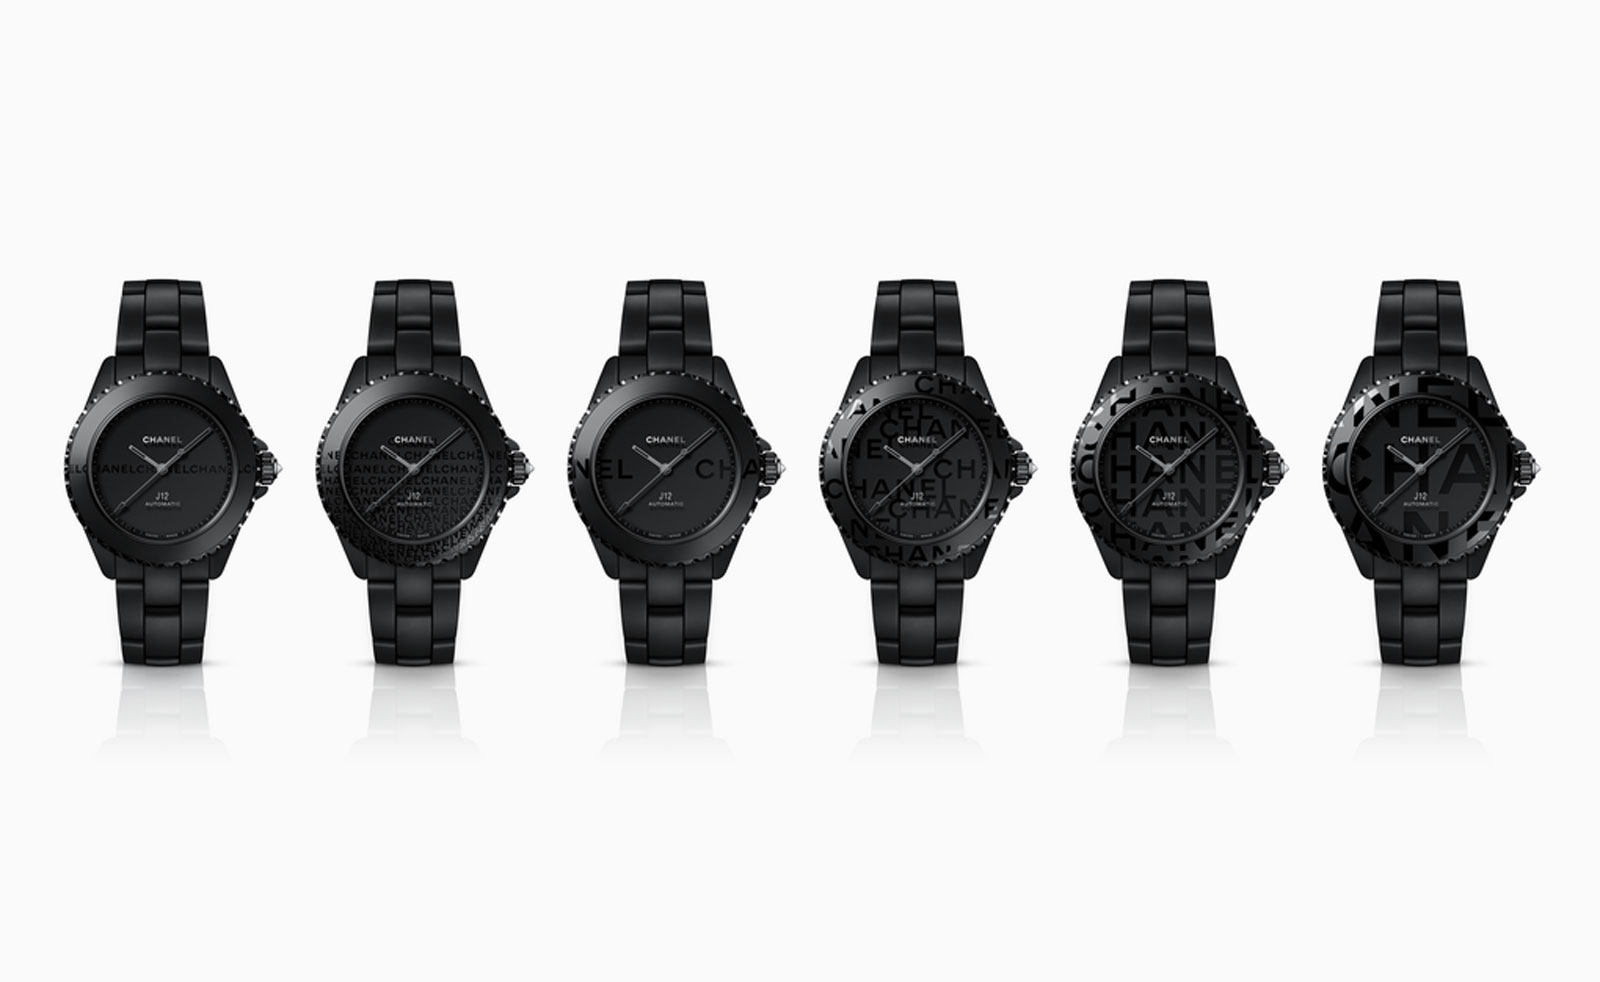 Introducing new Chanel watches, the Wanted